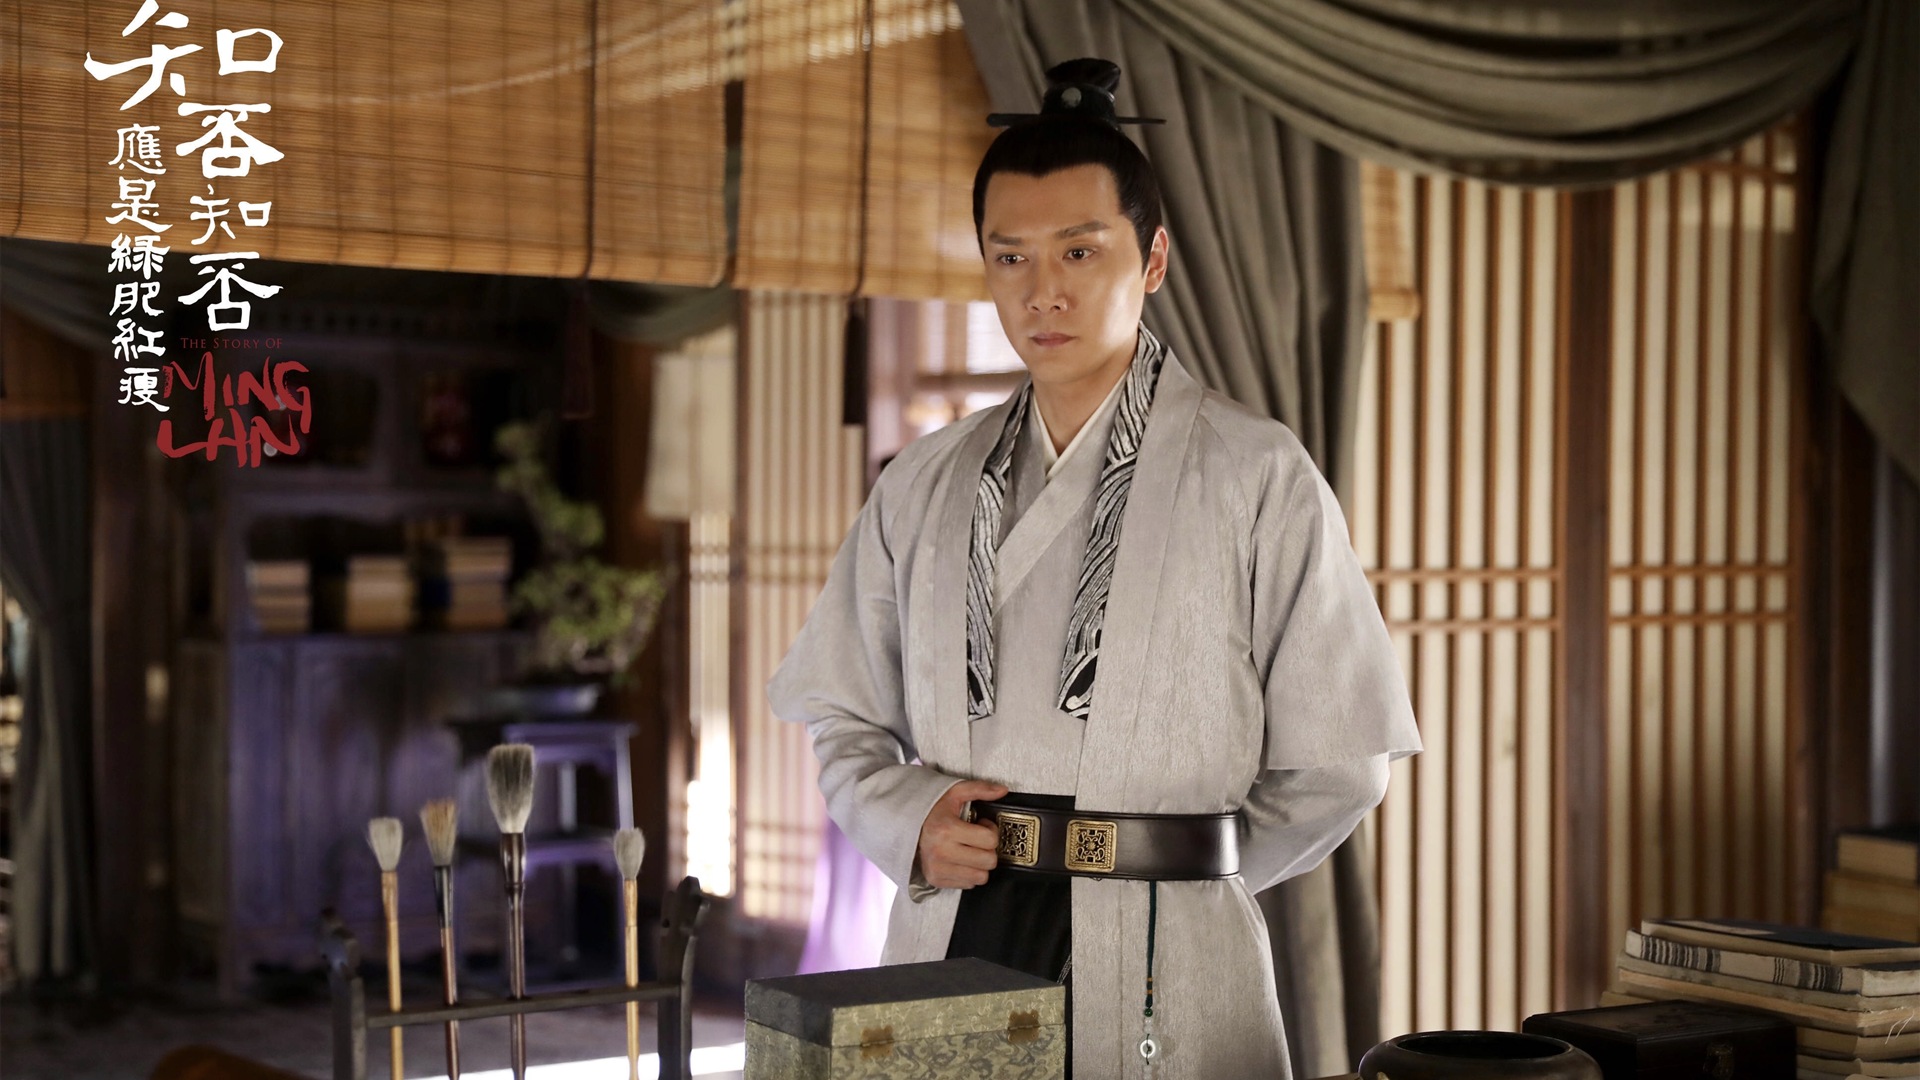 The Story Of MingLan, TV series HD wallpapers #49 - 1920x1080